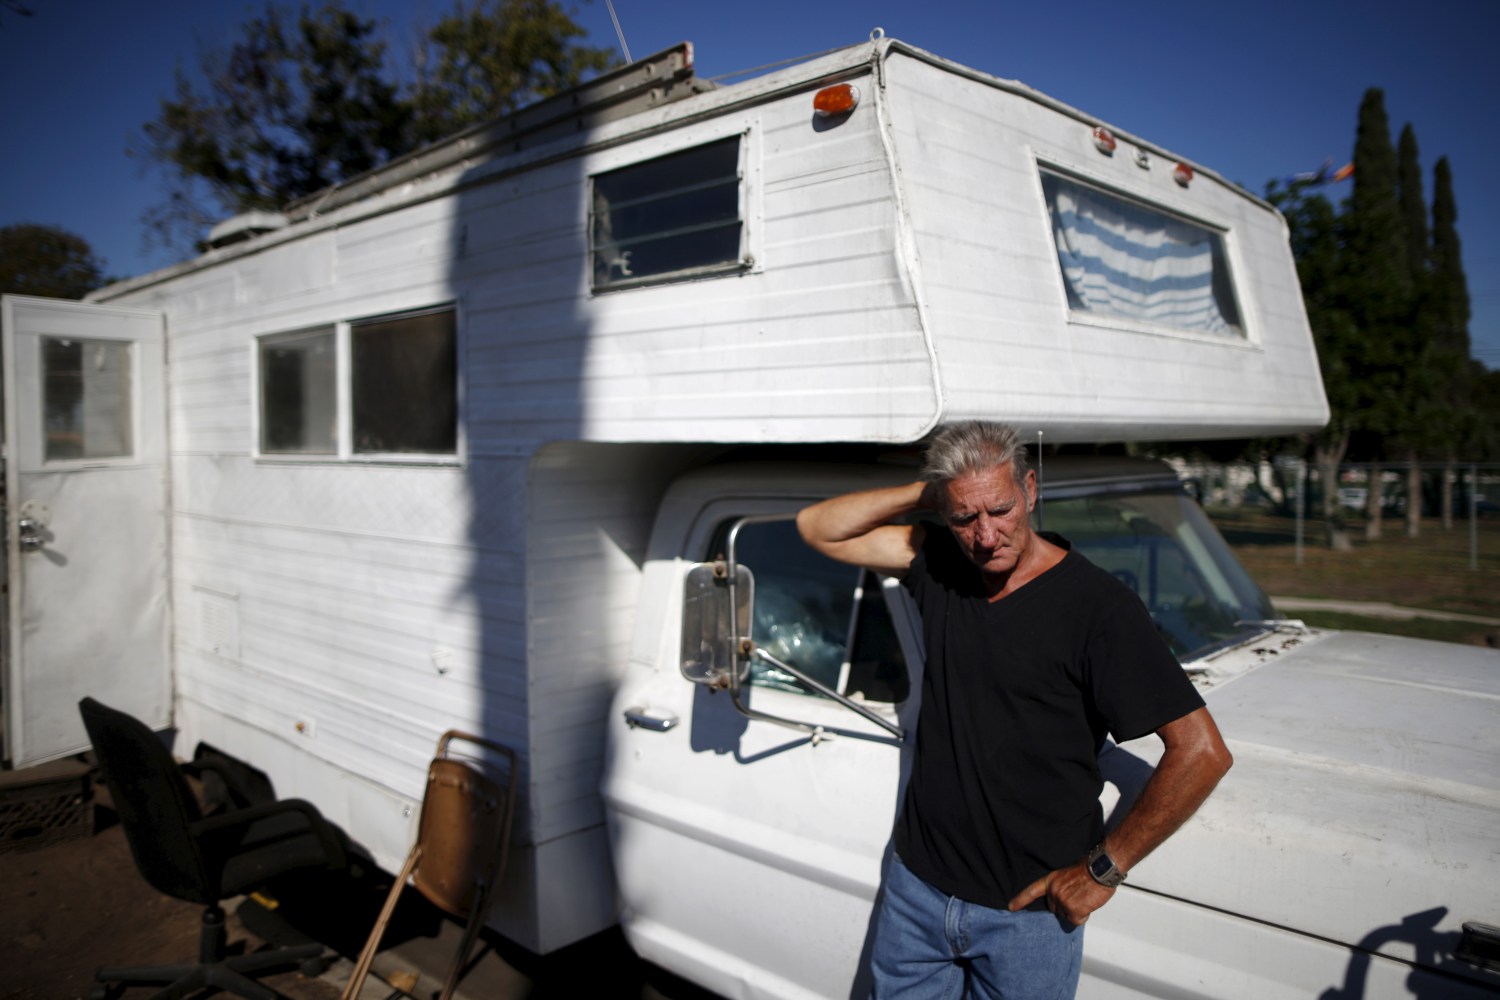 Nathan Allen, 65, poses for a portrait in front of the motorhome where he sleeps in a homeless RV and tent encampment near LAX airport in Los Angeles, California, United States, October 26, 2015. Allen lost his job as a handyman, and so couldn't afford to pay the rent for his apartment. Los Angeles is grappling with a massive homelessness problem, as forecasted El Nino downpours threaten to add to the misery of thousands of people who sleep on the streets. Mayor Eric Garcetti has proposed spending $100 million to combat the problem in the sprawling metropolis but stopped short of declaring a state of emergency. REUTERS/Lucy Nicholson PICTURE 16 OF 17 - SEARCH "NICHOLSON MOTORHOME" FOR ALL IMAGES - GF10000270563